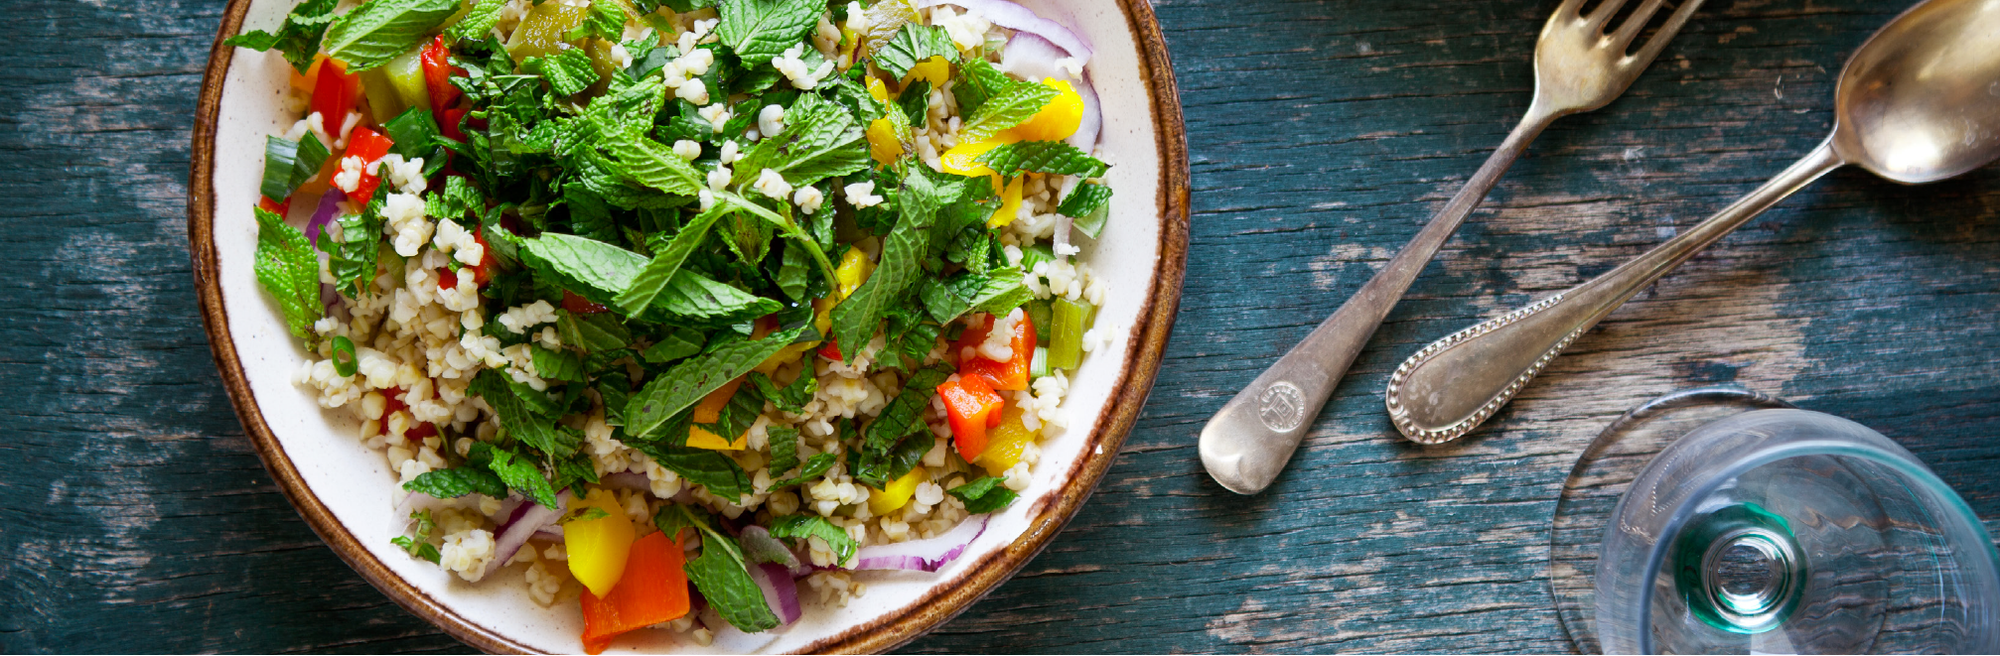 a bowl of salad with quinoa, mint leaves, cilantro, cherry tomatoes, diced red onion and mined garlic beside a glass and a spoon and fork. 